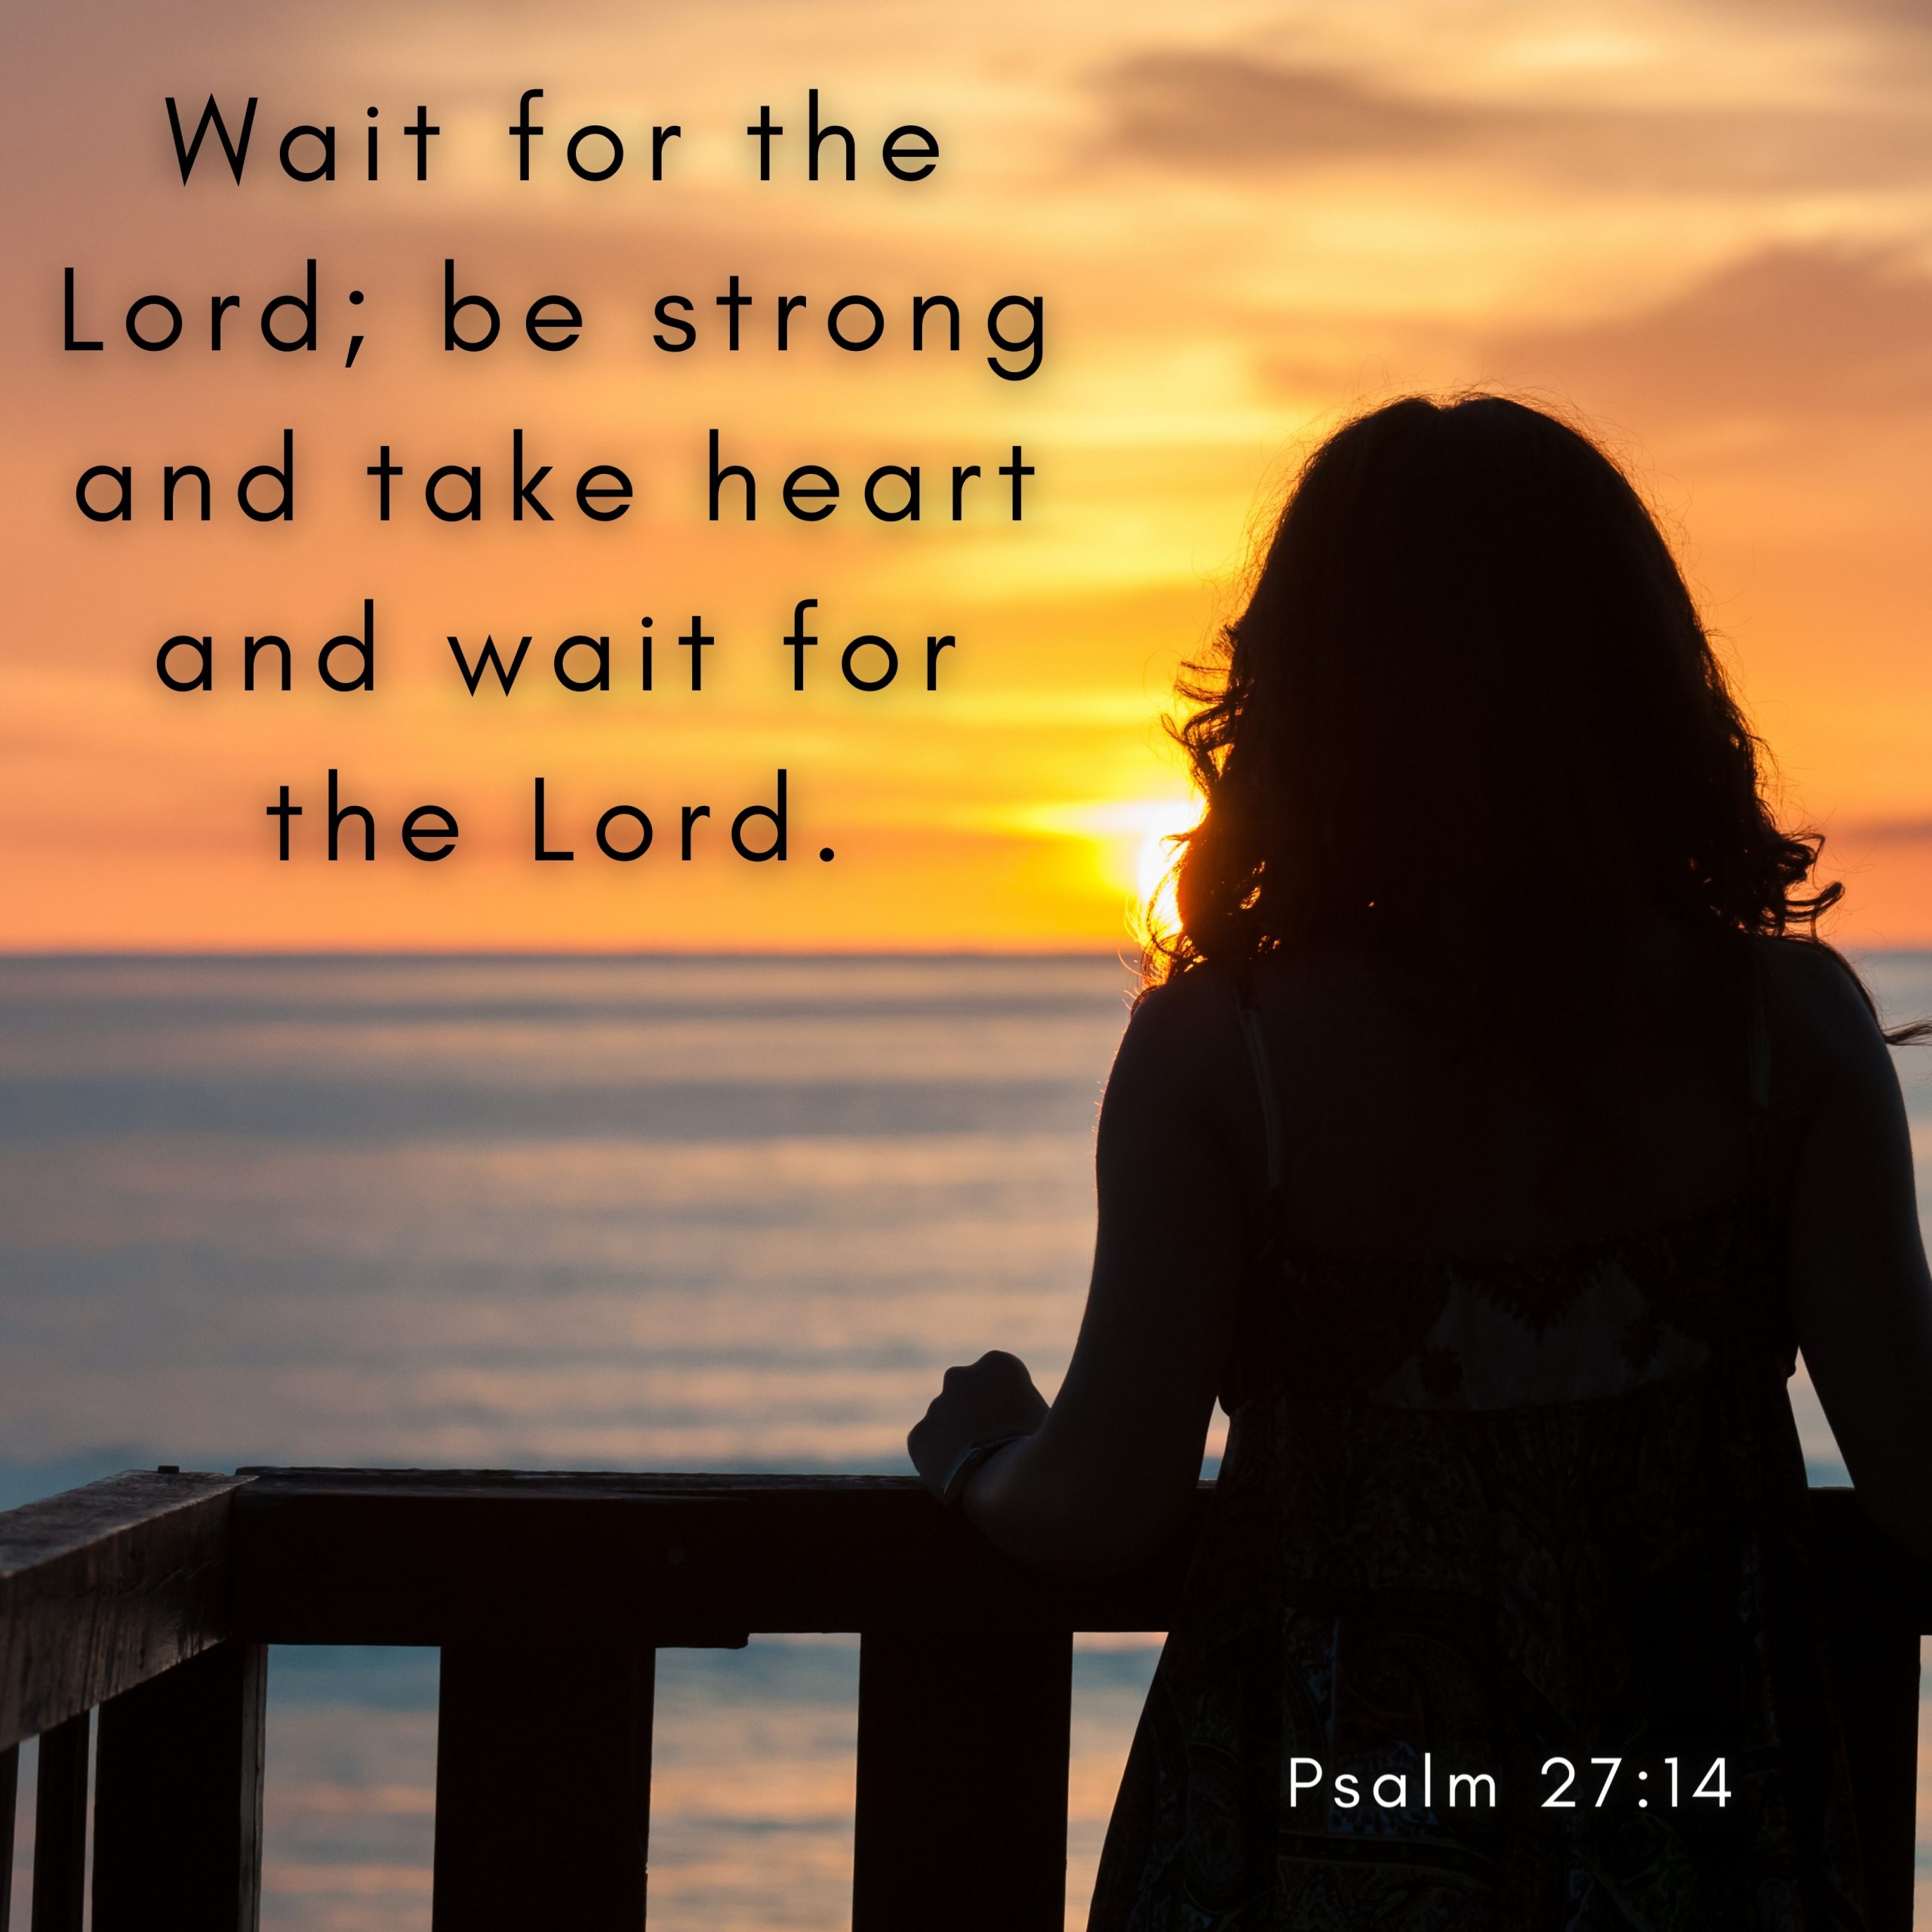 Finding Strength in Waiting: Trusting God During Trials